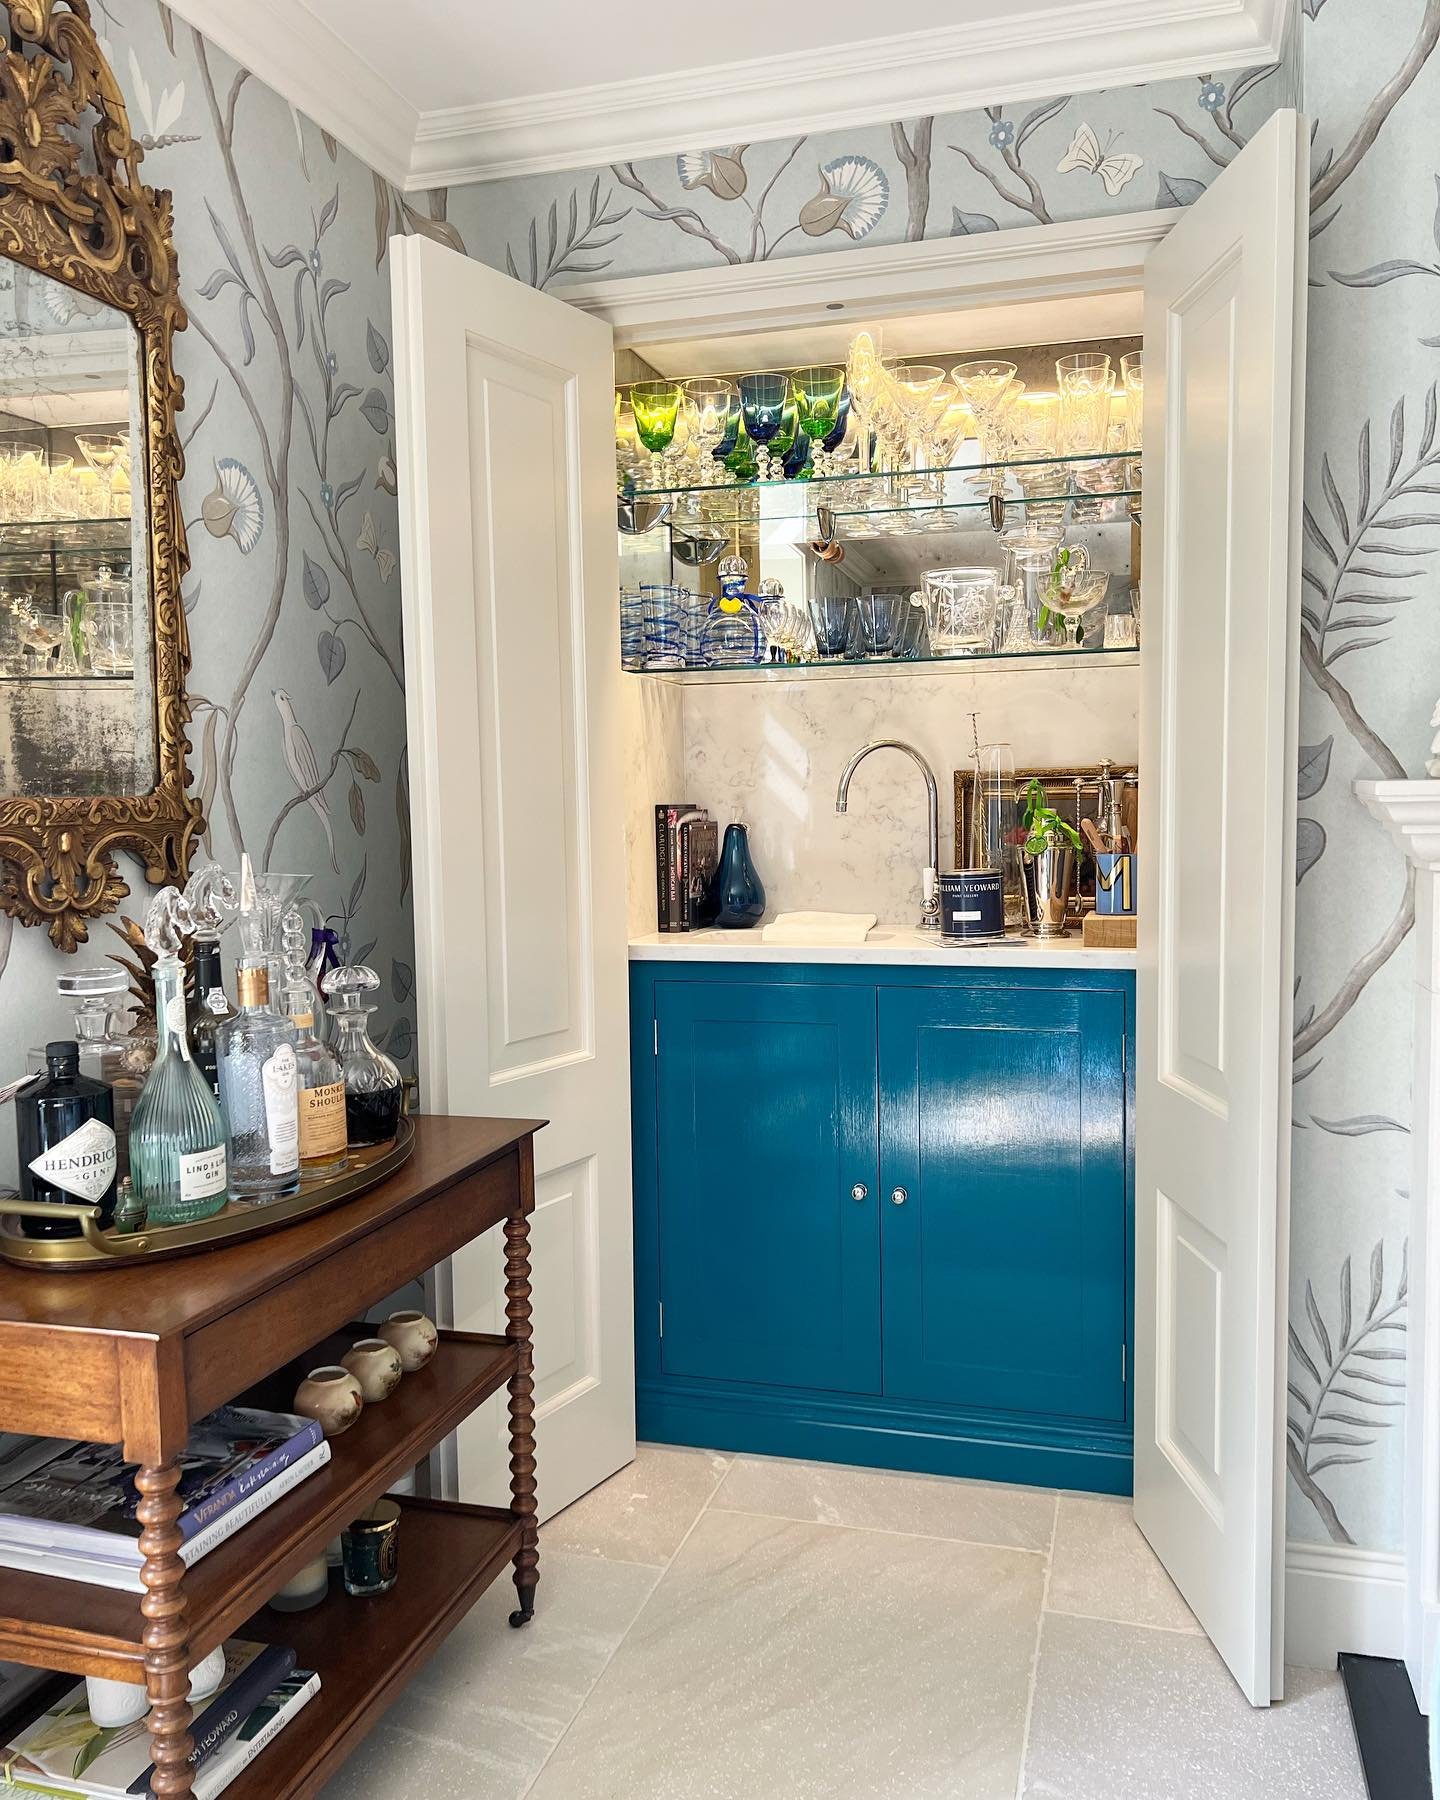 A rich colour in a high gloss finish is such a perfect combination! It was treat to paint this little Butlers Bar cupboard in @williamyeoward &lsquo;s beautiful &lsquo;peacock&rsquo; shade. Every brush stroke needs to be perfect with a high gloss fin